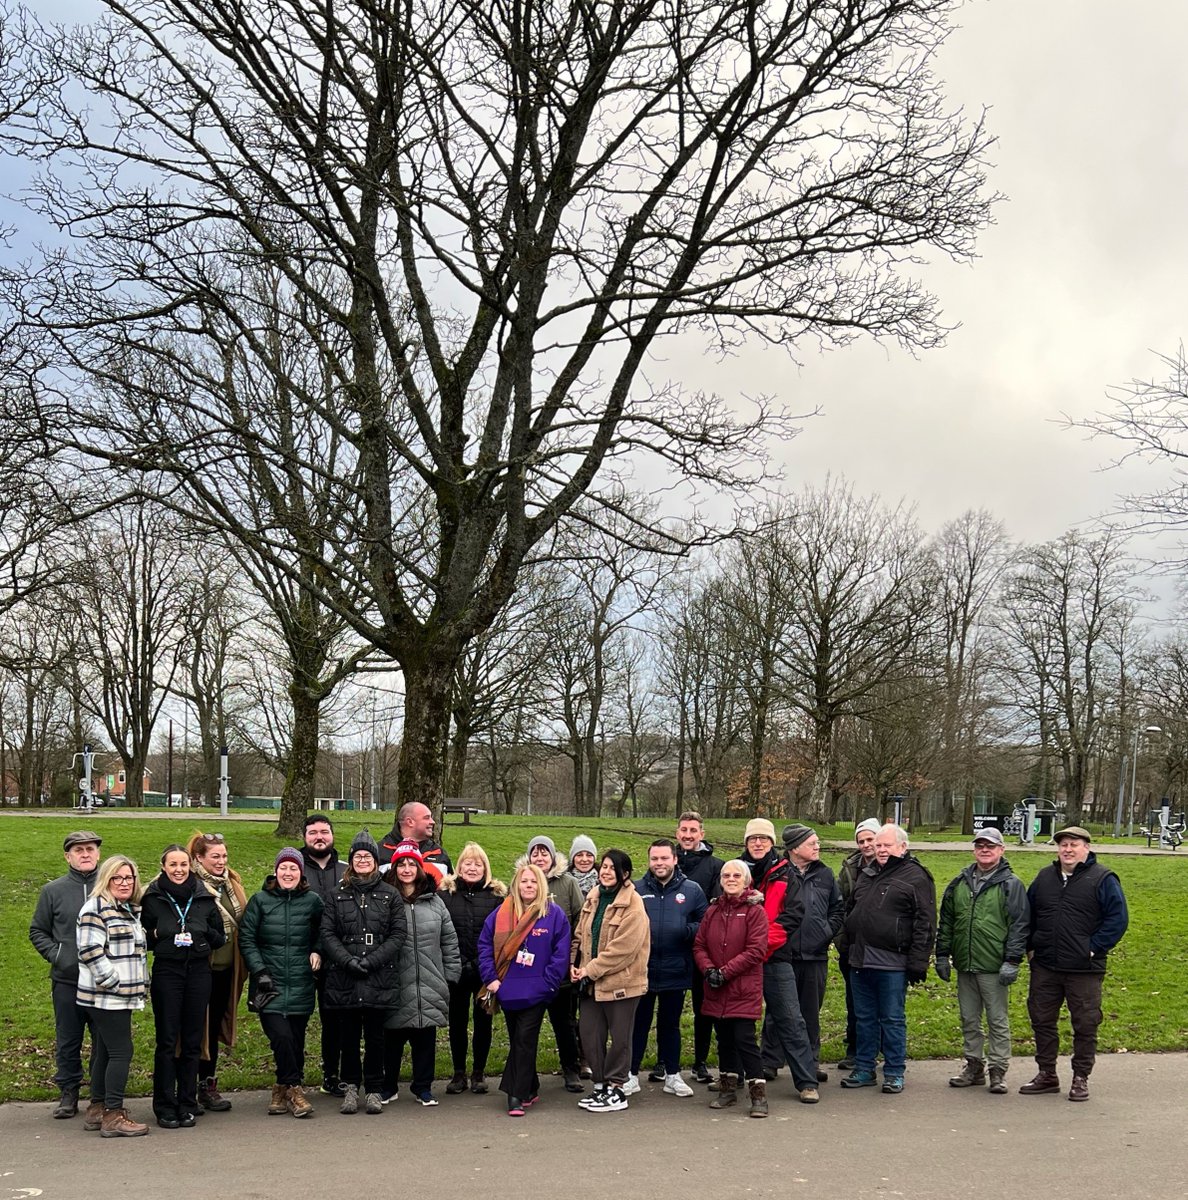 Thank you to everyone who joined us for the Wellbeing Heritage Walk 🚶‍♂️🚶‍♀️Your presence and enthusiasm made it a memorable morning of networking and connection-building 🤝Together, we explored innovative ways to enhance street safety through the lens of wellbeing and heritage 🏙️🌿